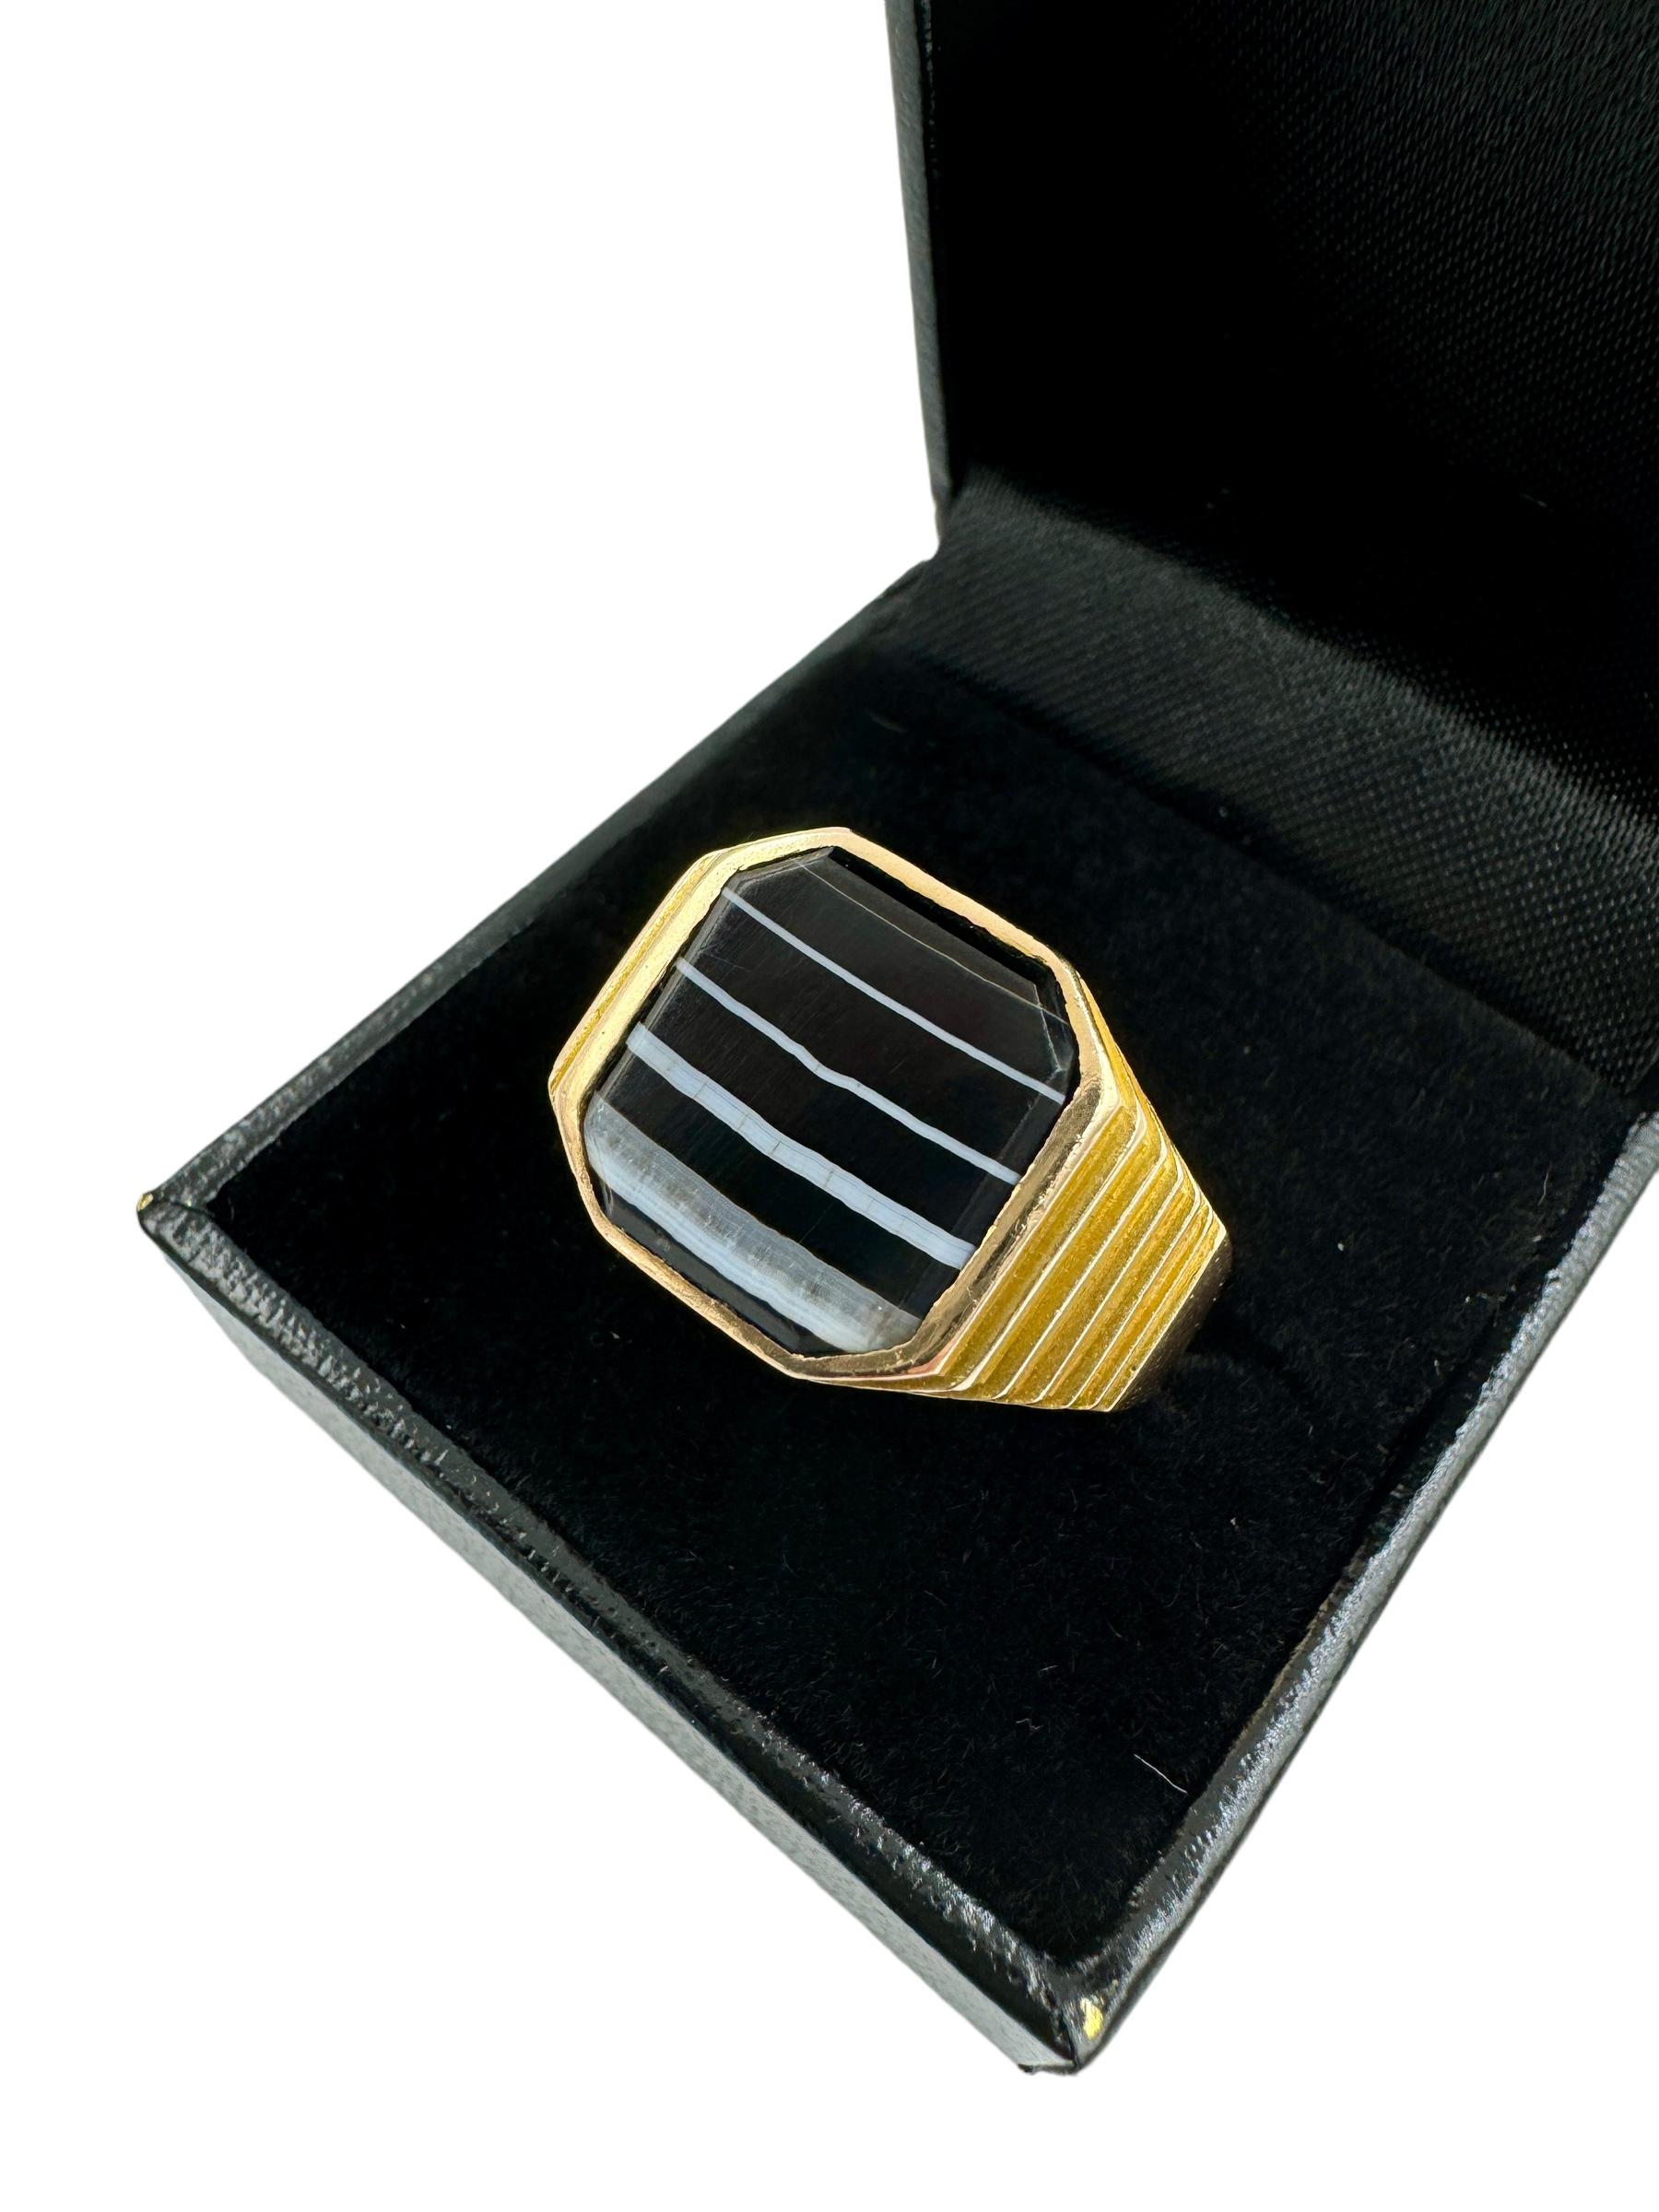 Art Deco men's banded agate gold ring, circa 1930.

The Art Deco Men's Banded Agate Gold Ring is a stunning example of the elegance and sophistication of the Art Deco era. This ring features a bold and masculine design, with a large banded agate